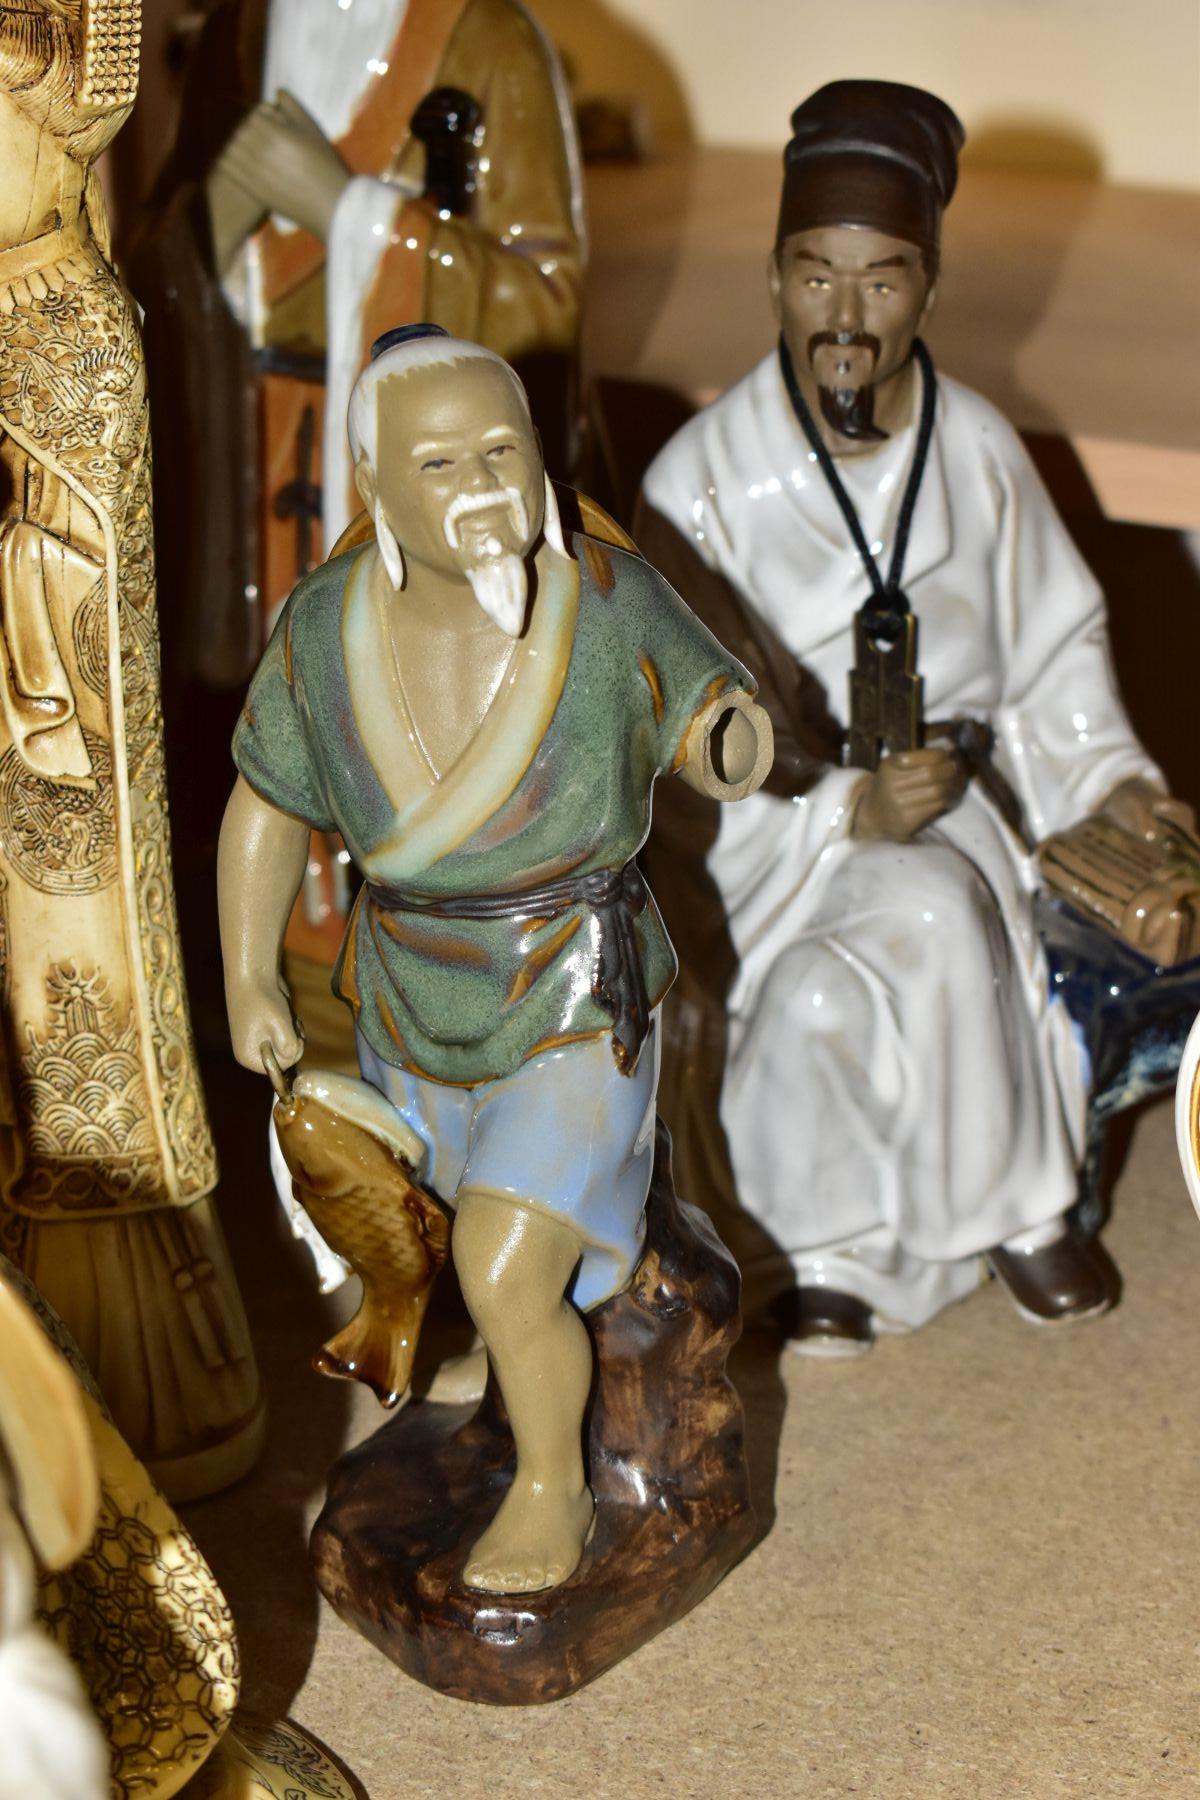 A GROUP OF MODERN ORIENTAL FIGURINES, to include fifteen figurines featuring people reading, fishing - Image 7 of 12